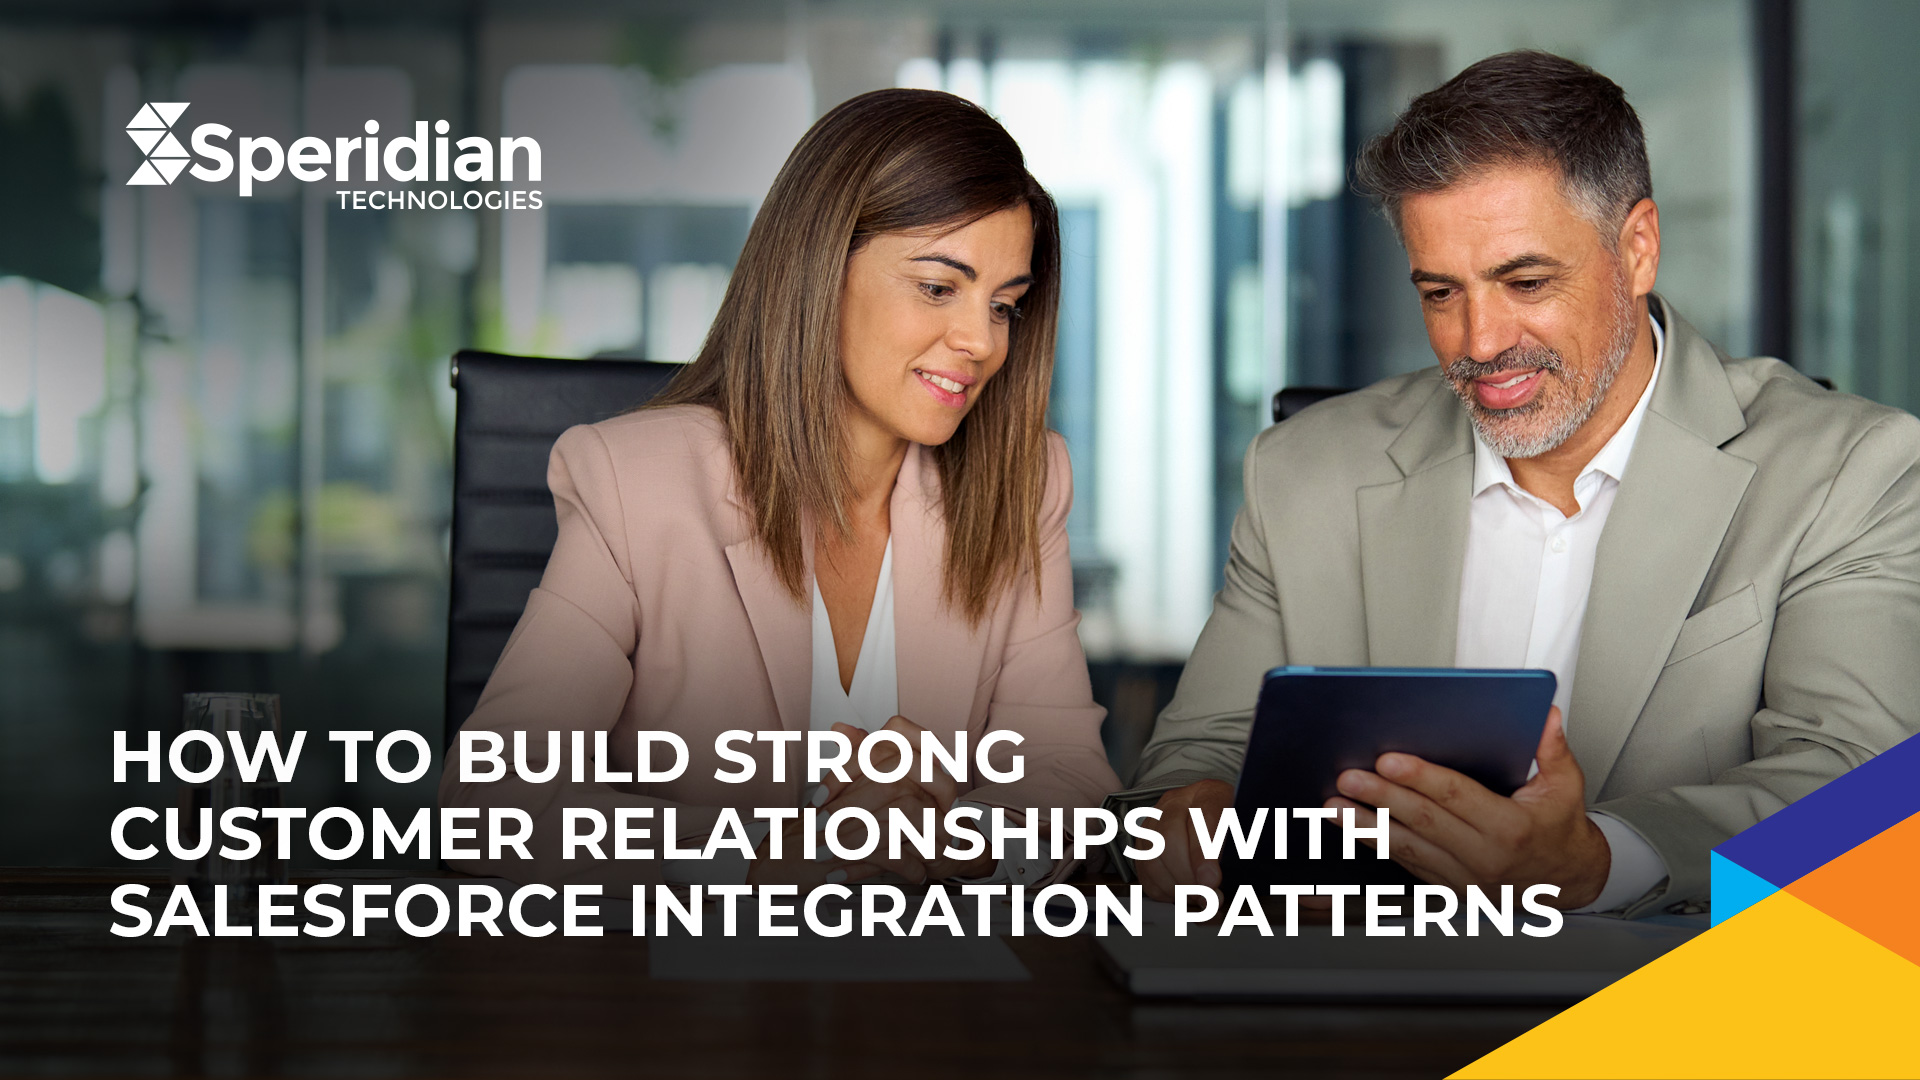 How to Build Strong Customer Relationships with Salesforce Integration Patterns